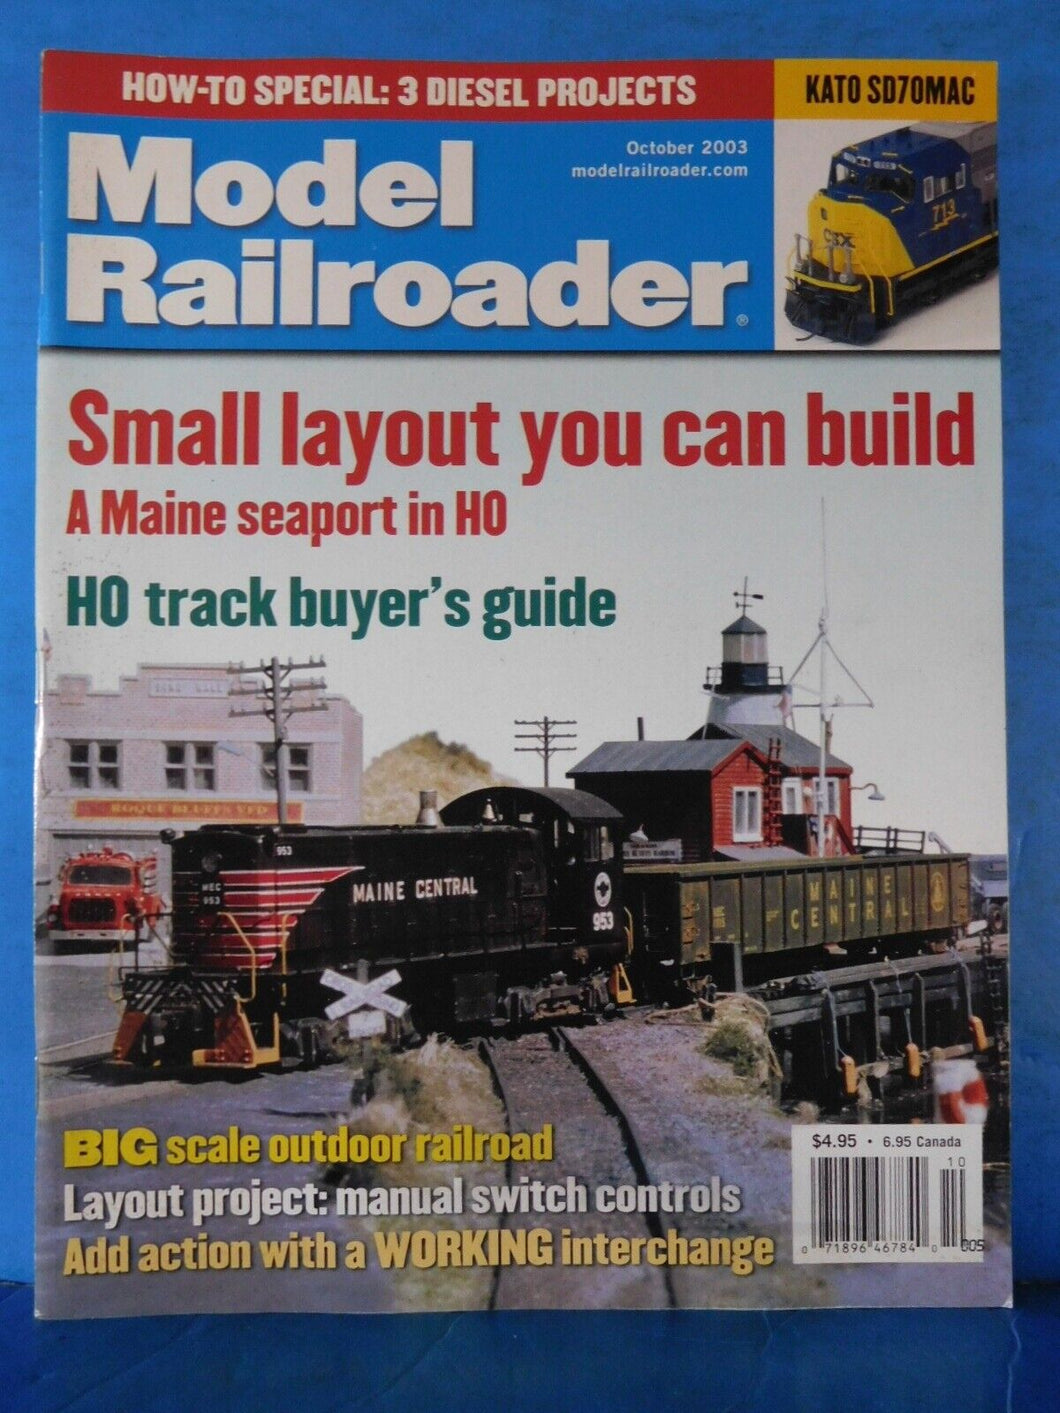 Model Railroader Magazine 2003 October Small layout ME seaport Manual switch con